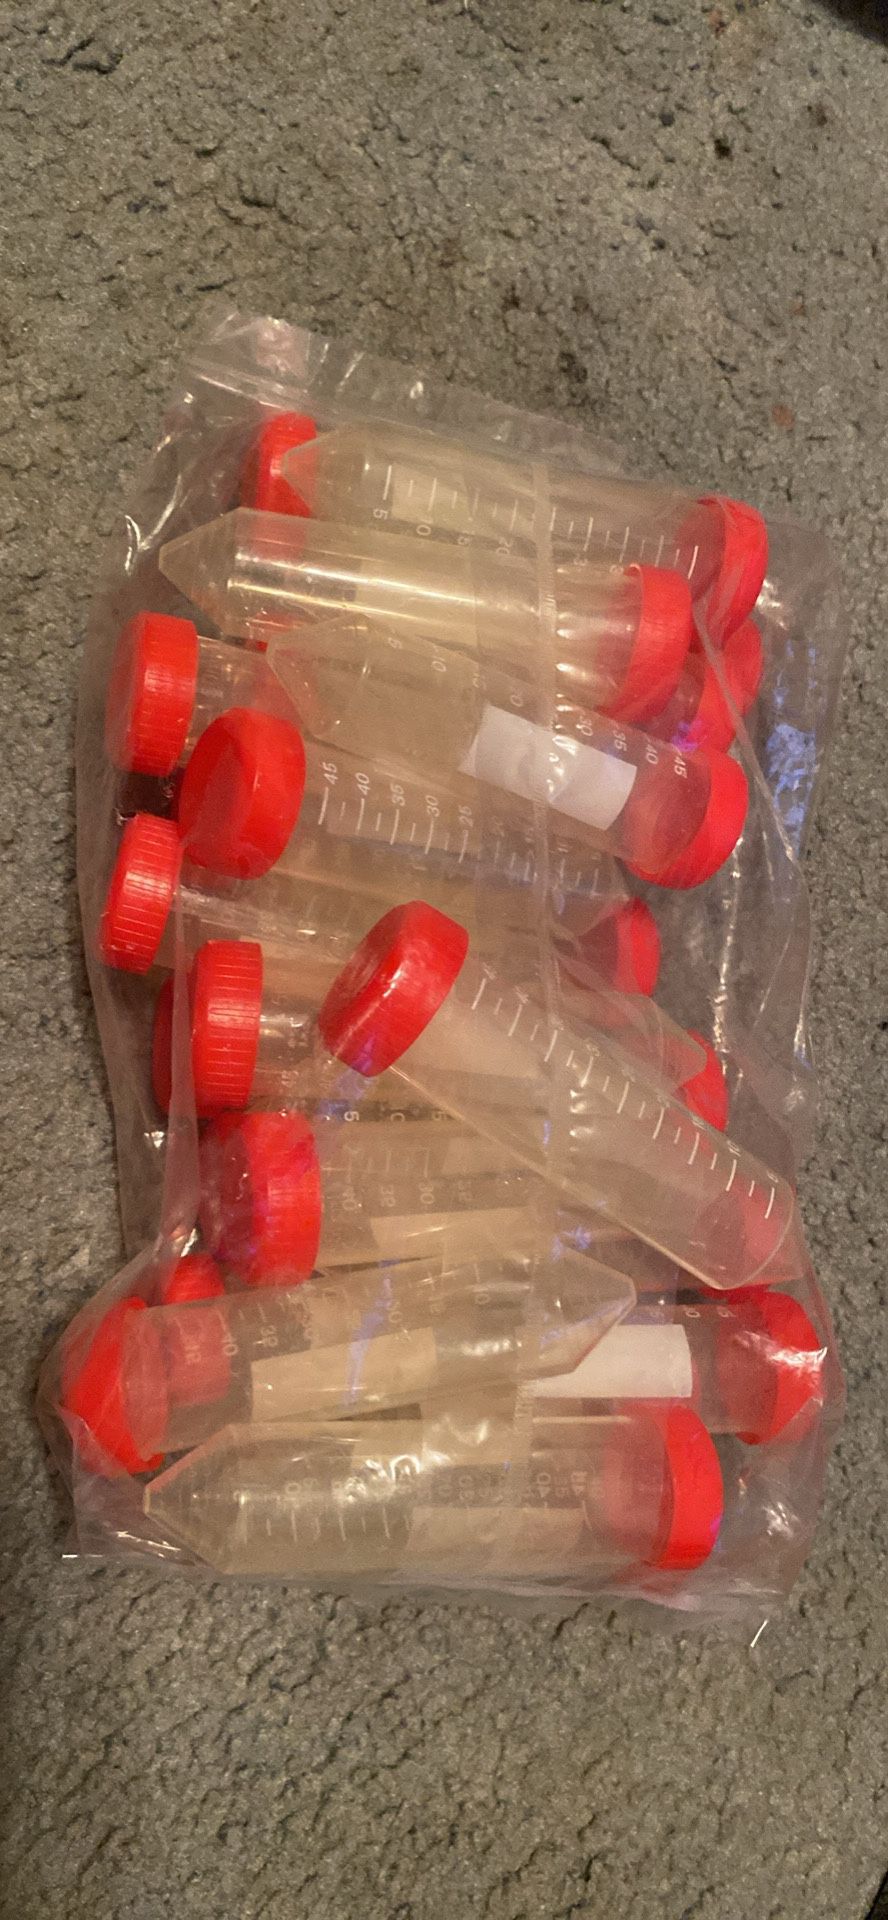 50mL Centrifuge Tube with Attached Red Screw Cap